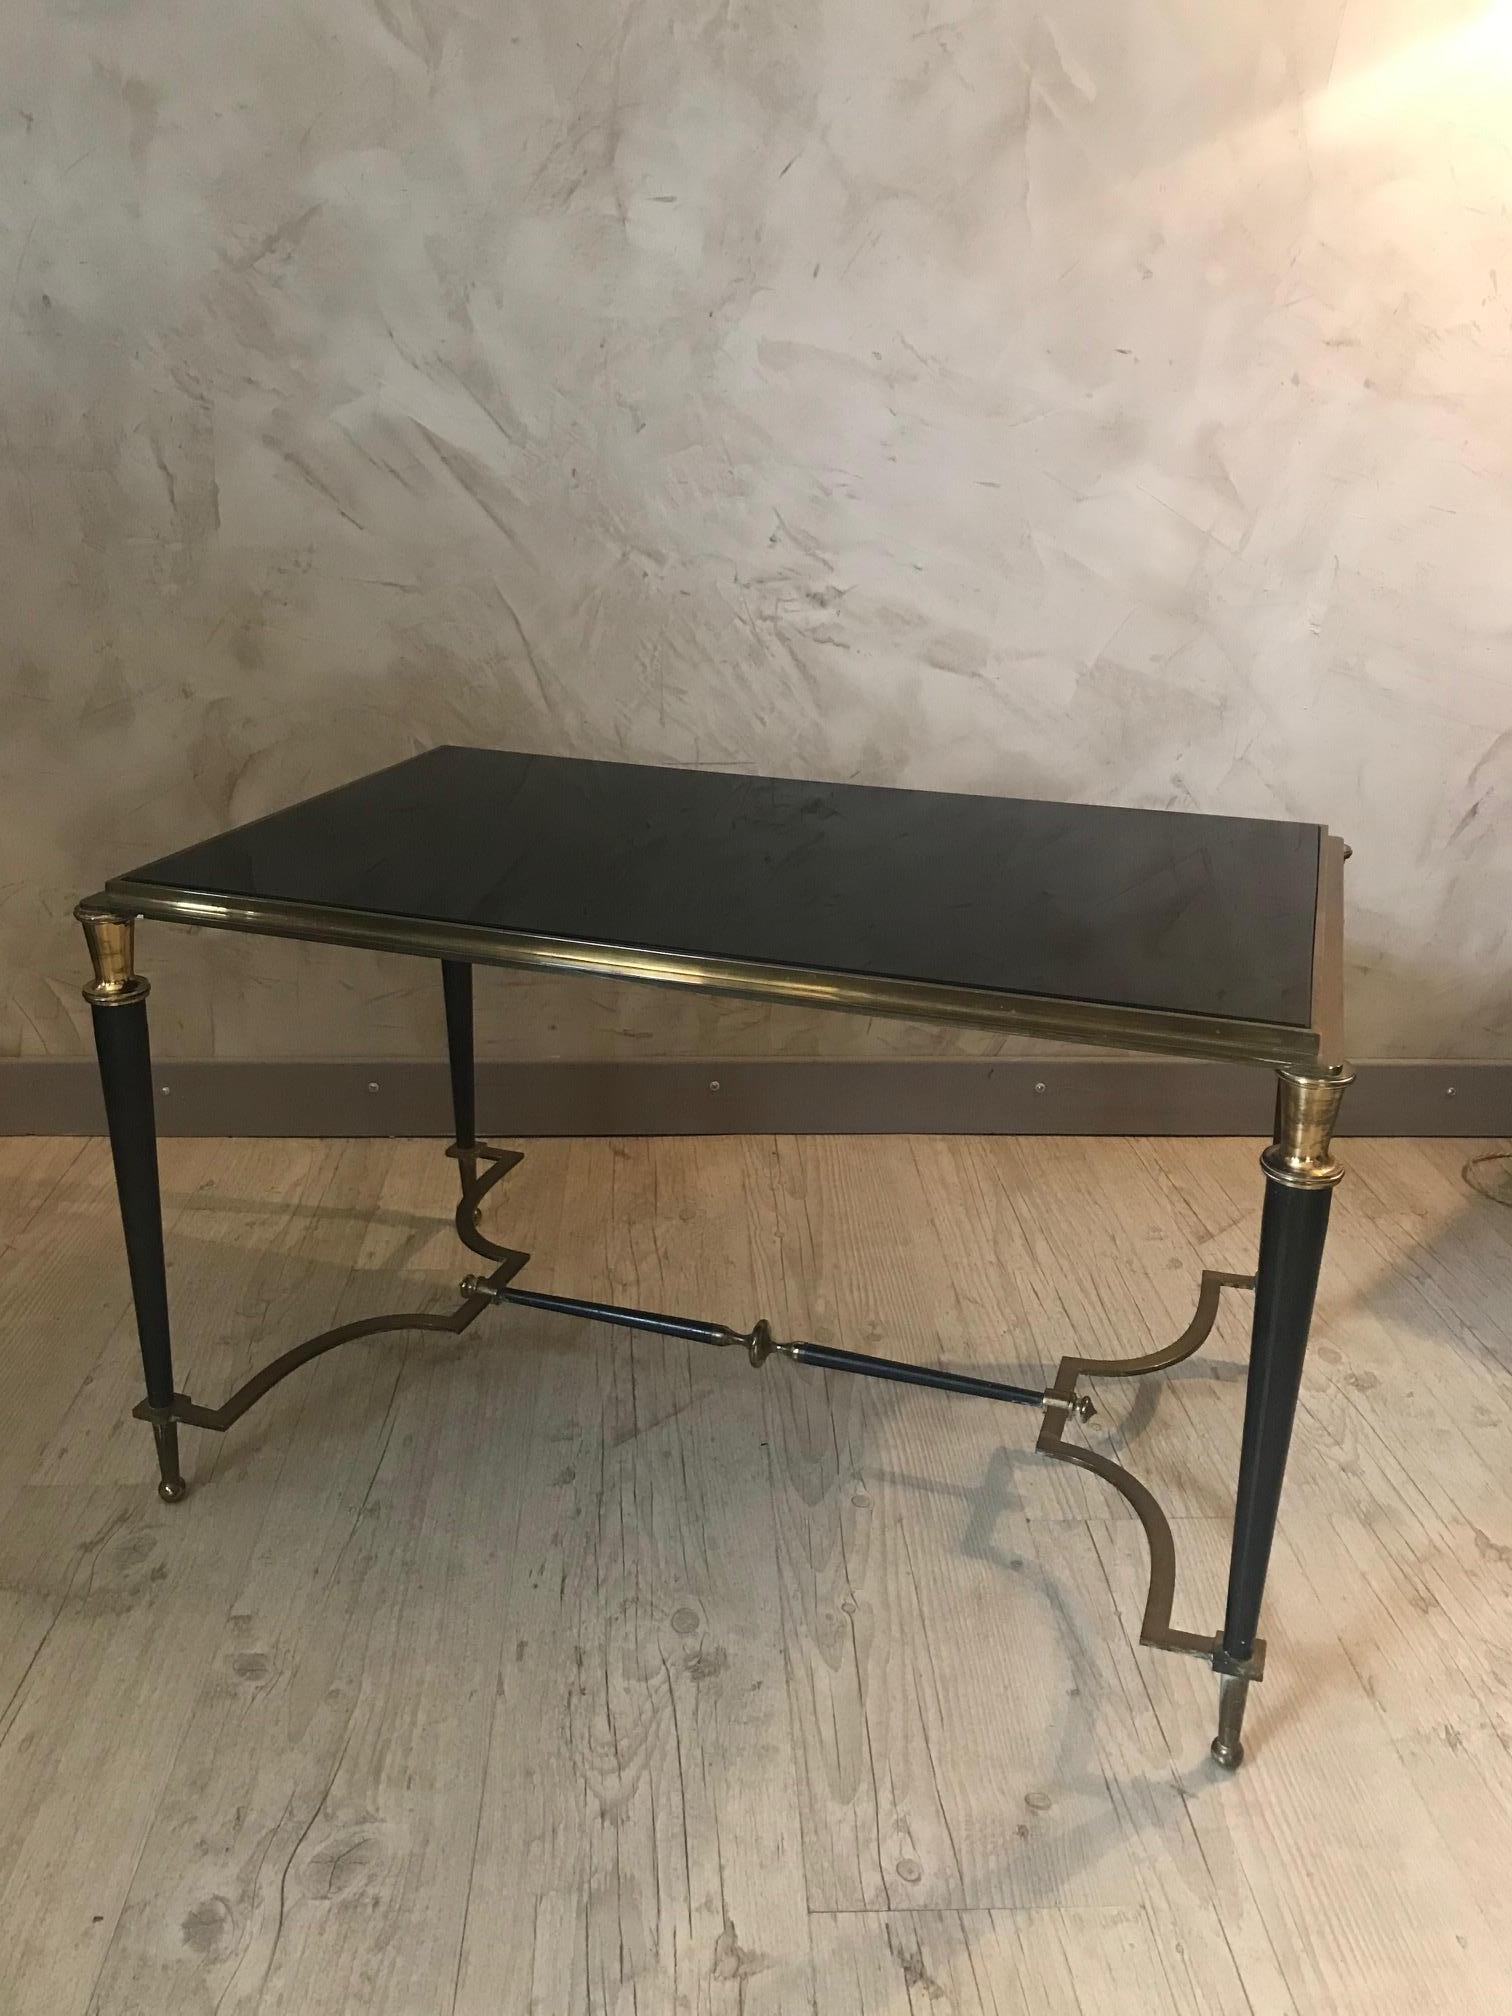 Beautiful 20th century French Maison Baguès gilded brass and black glass coffee table from the 1950s.
Exceptional quality and rare shape of the base.
Good condition.